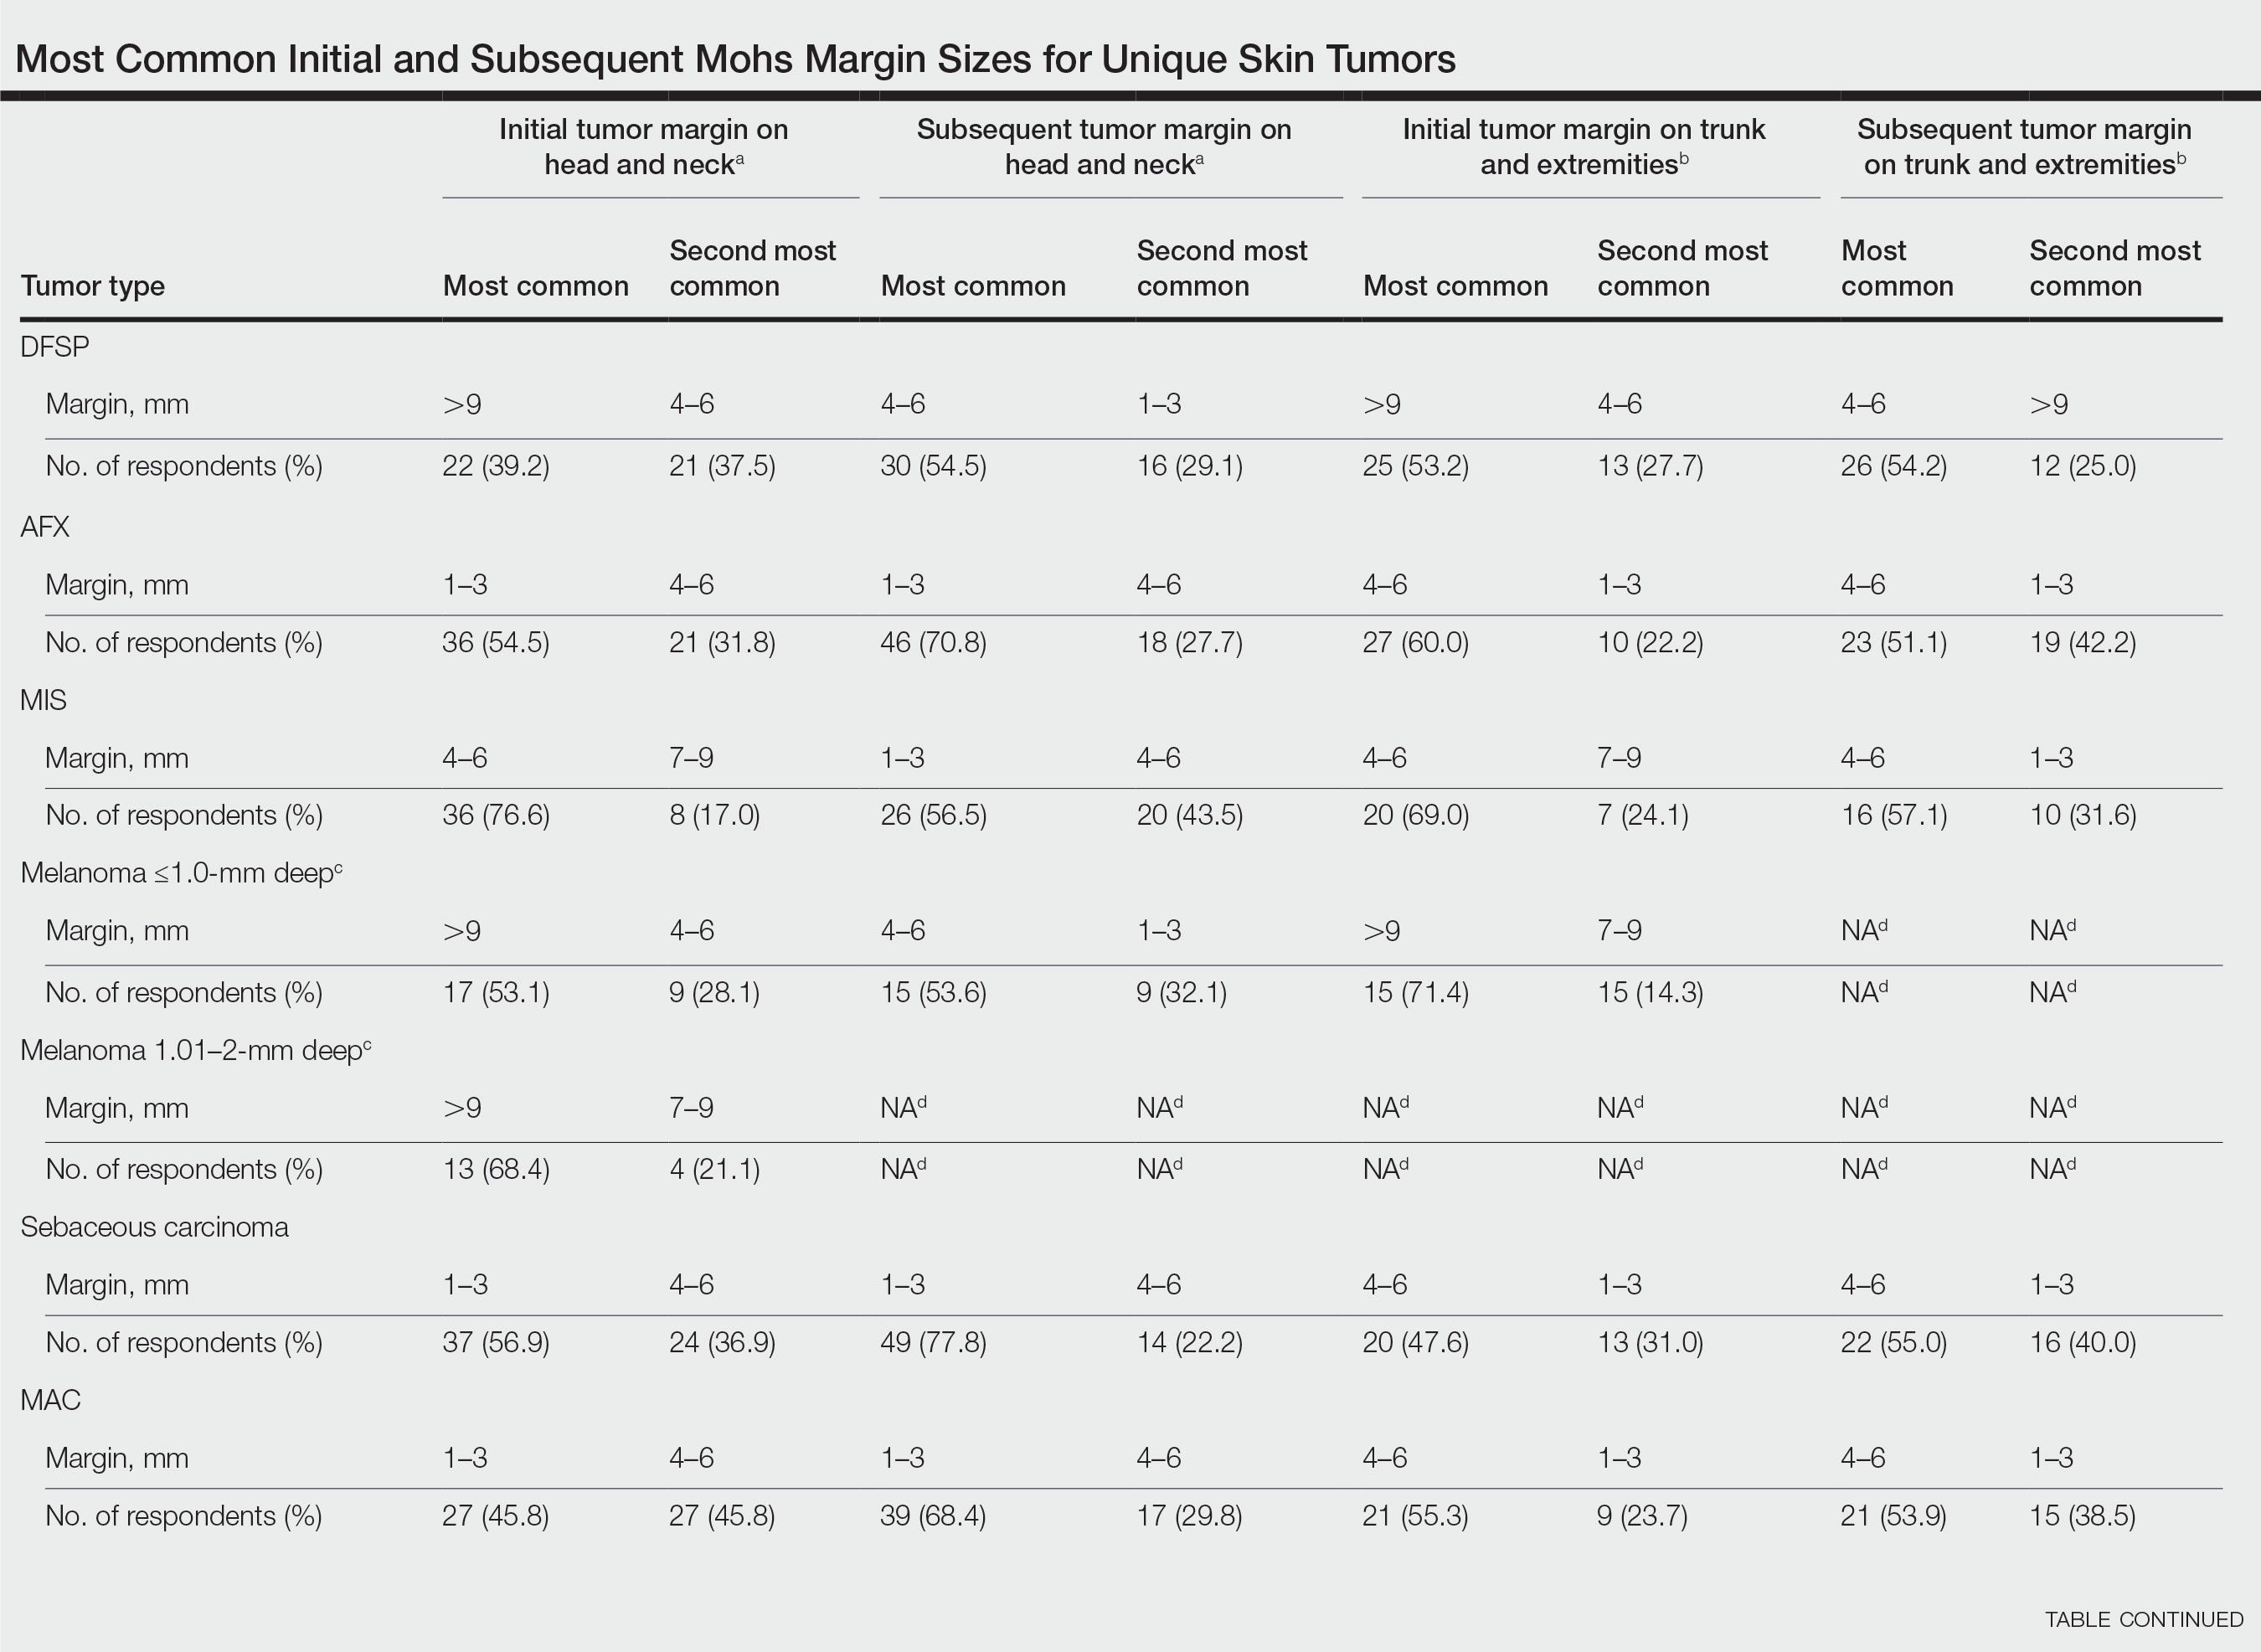 Most Common Initial and Subsequent Mohs Margin Sizes for Unique Skin Tumors